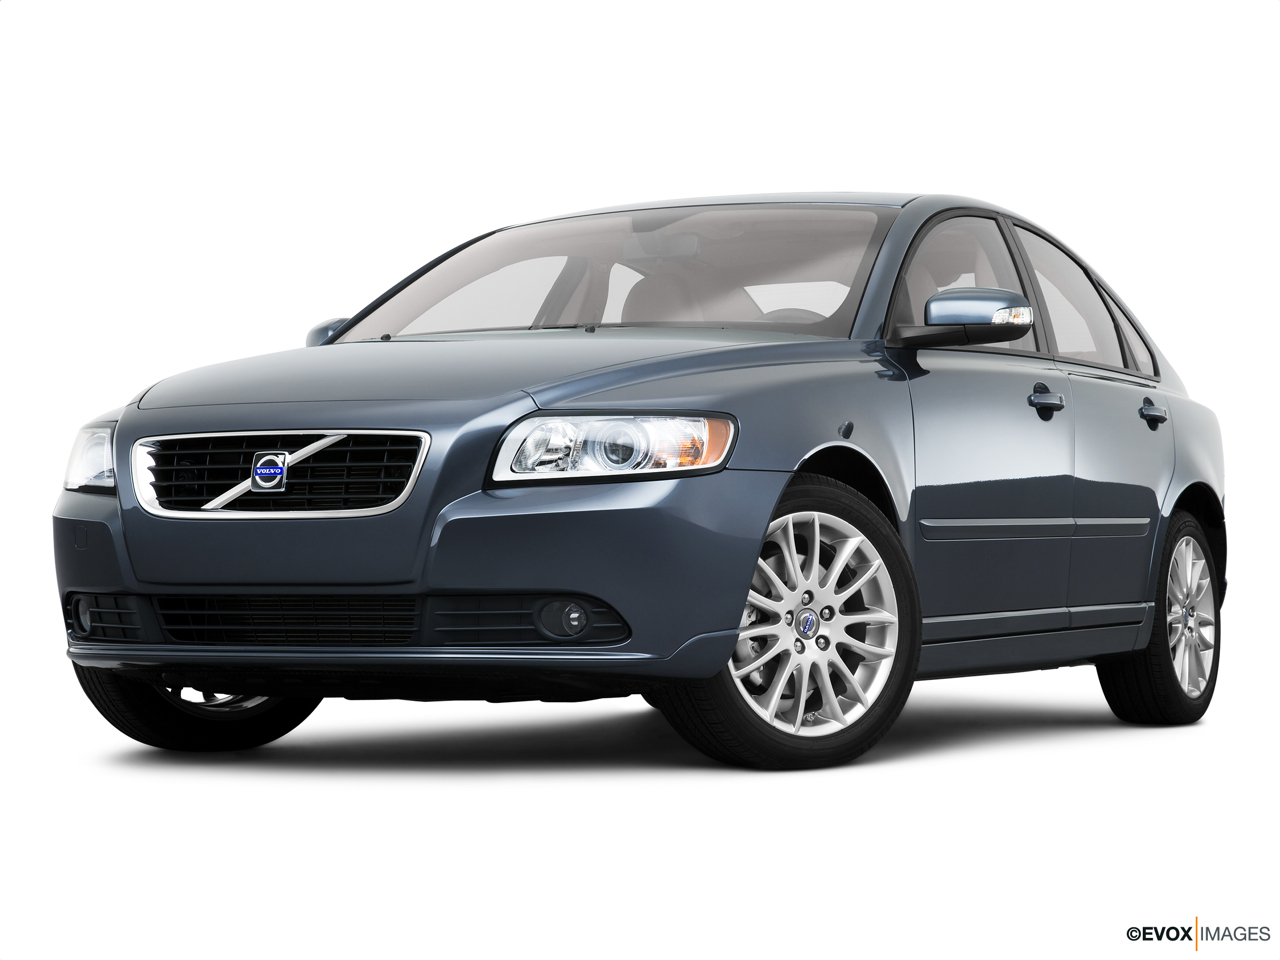 2010 Volvo S40 2.4i Front angle view, low wide perspective. 